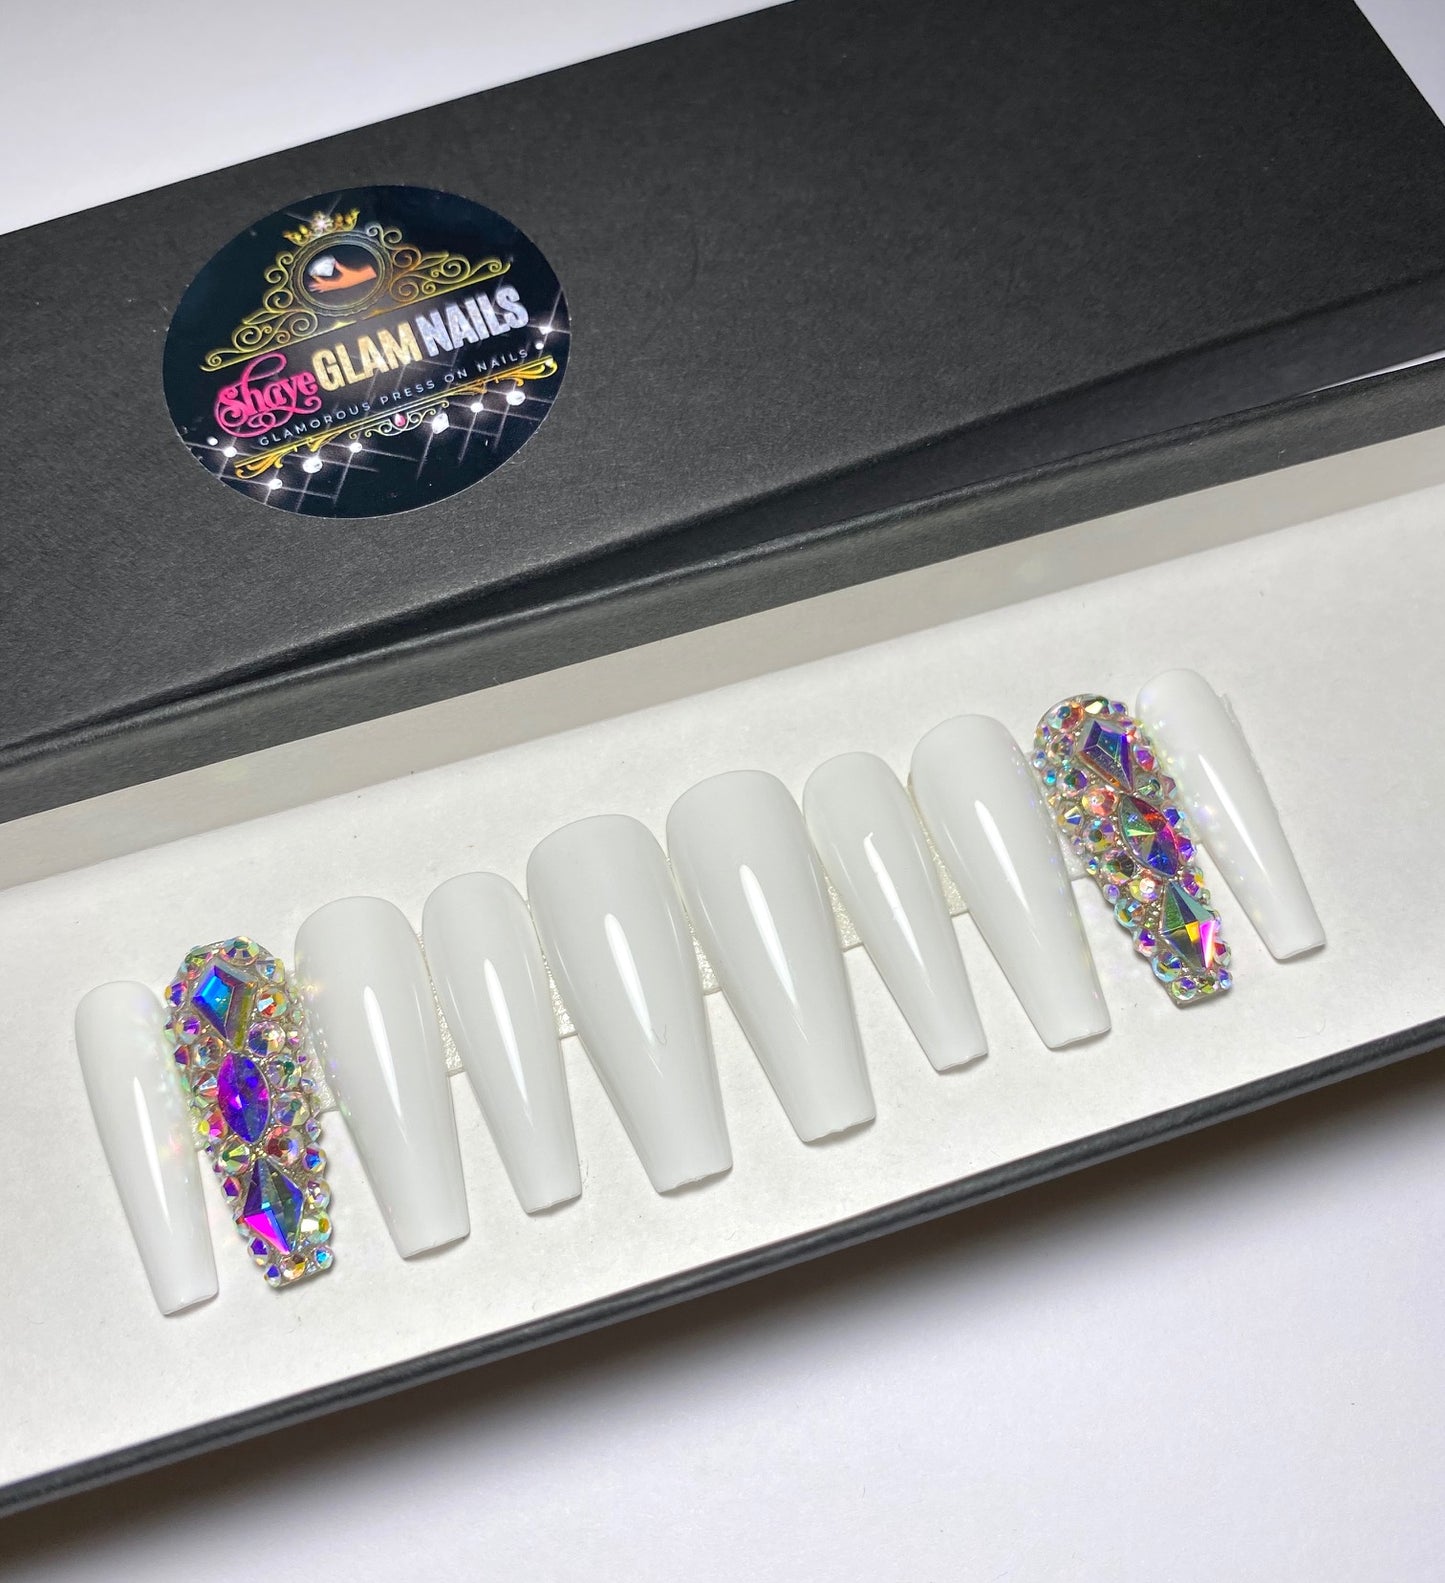 Black All Bling Everything Press On Nails – Shaye Glam Nails